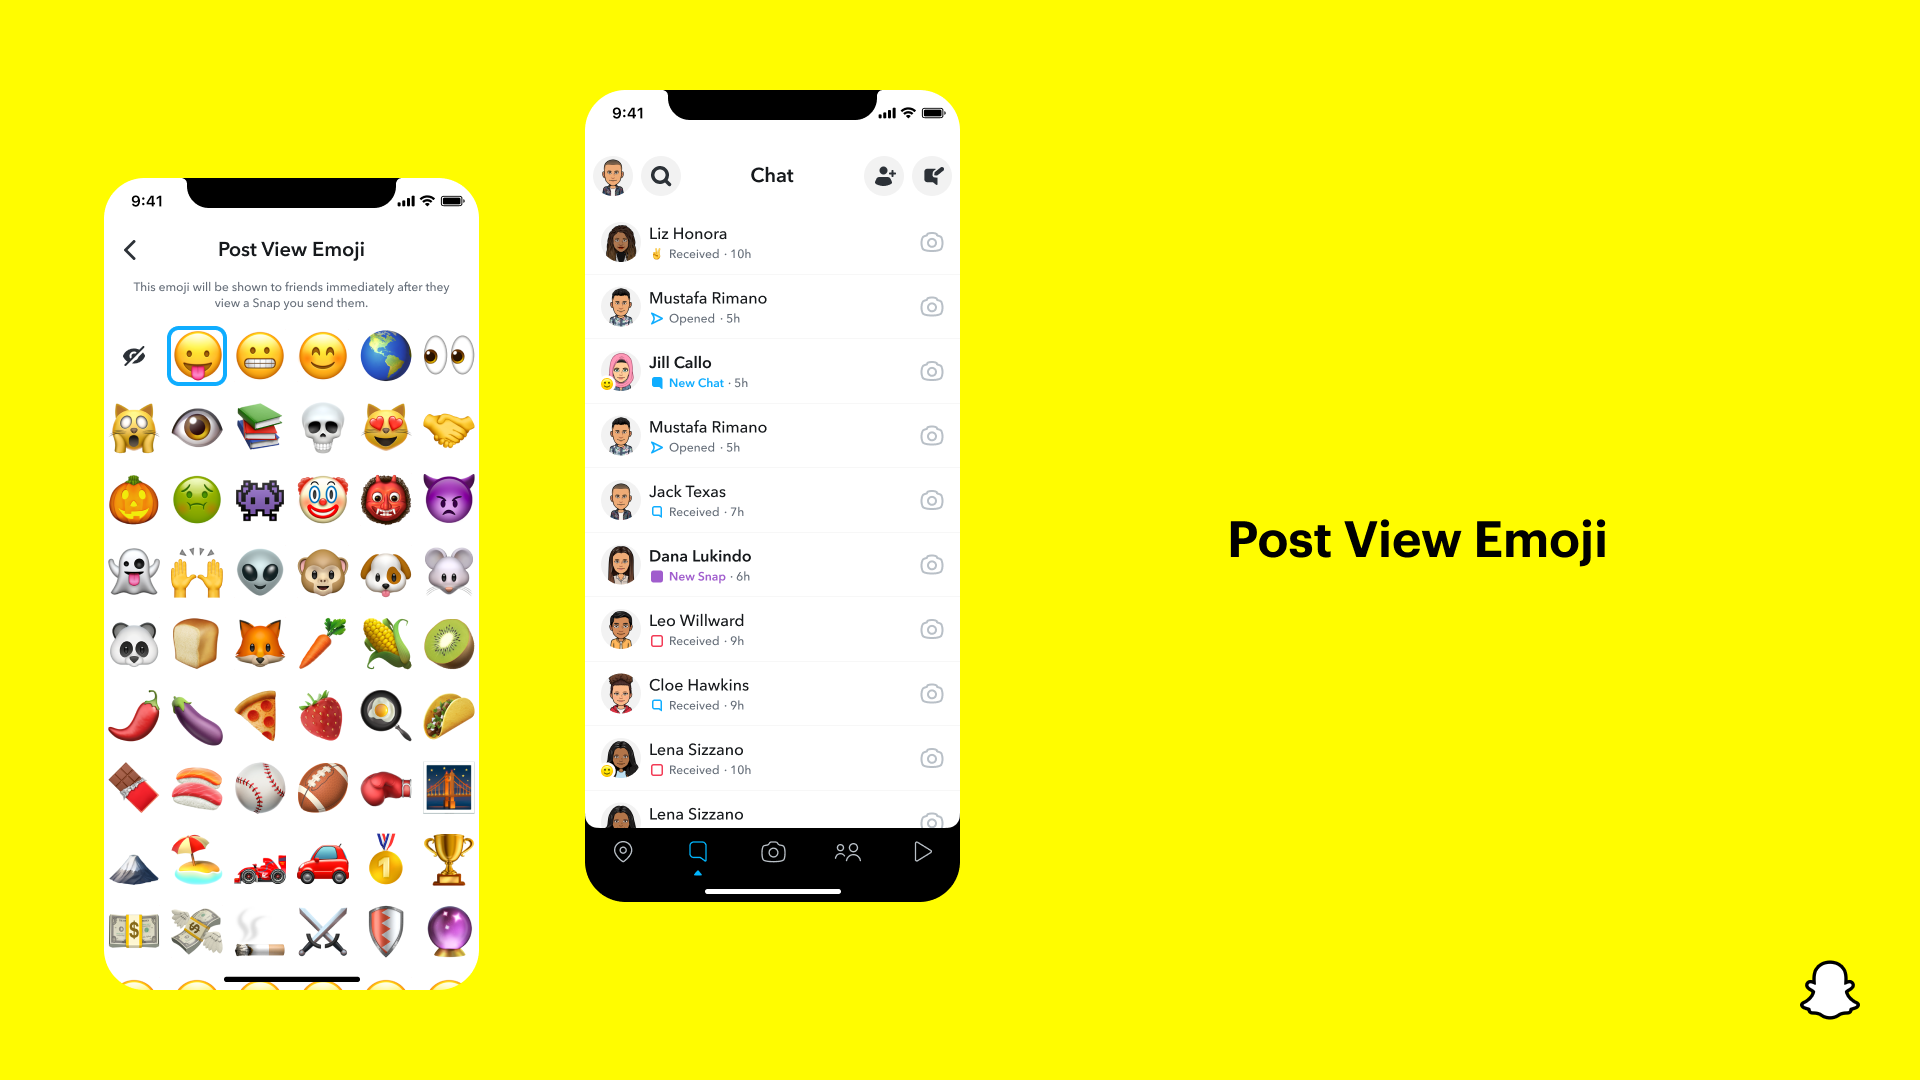 Snapchat+: How to Choose Your Post View Emoji